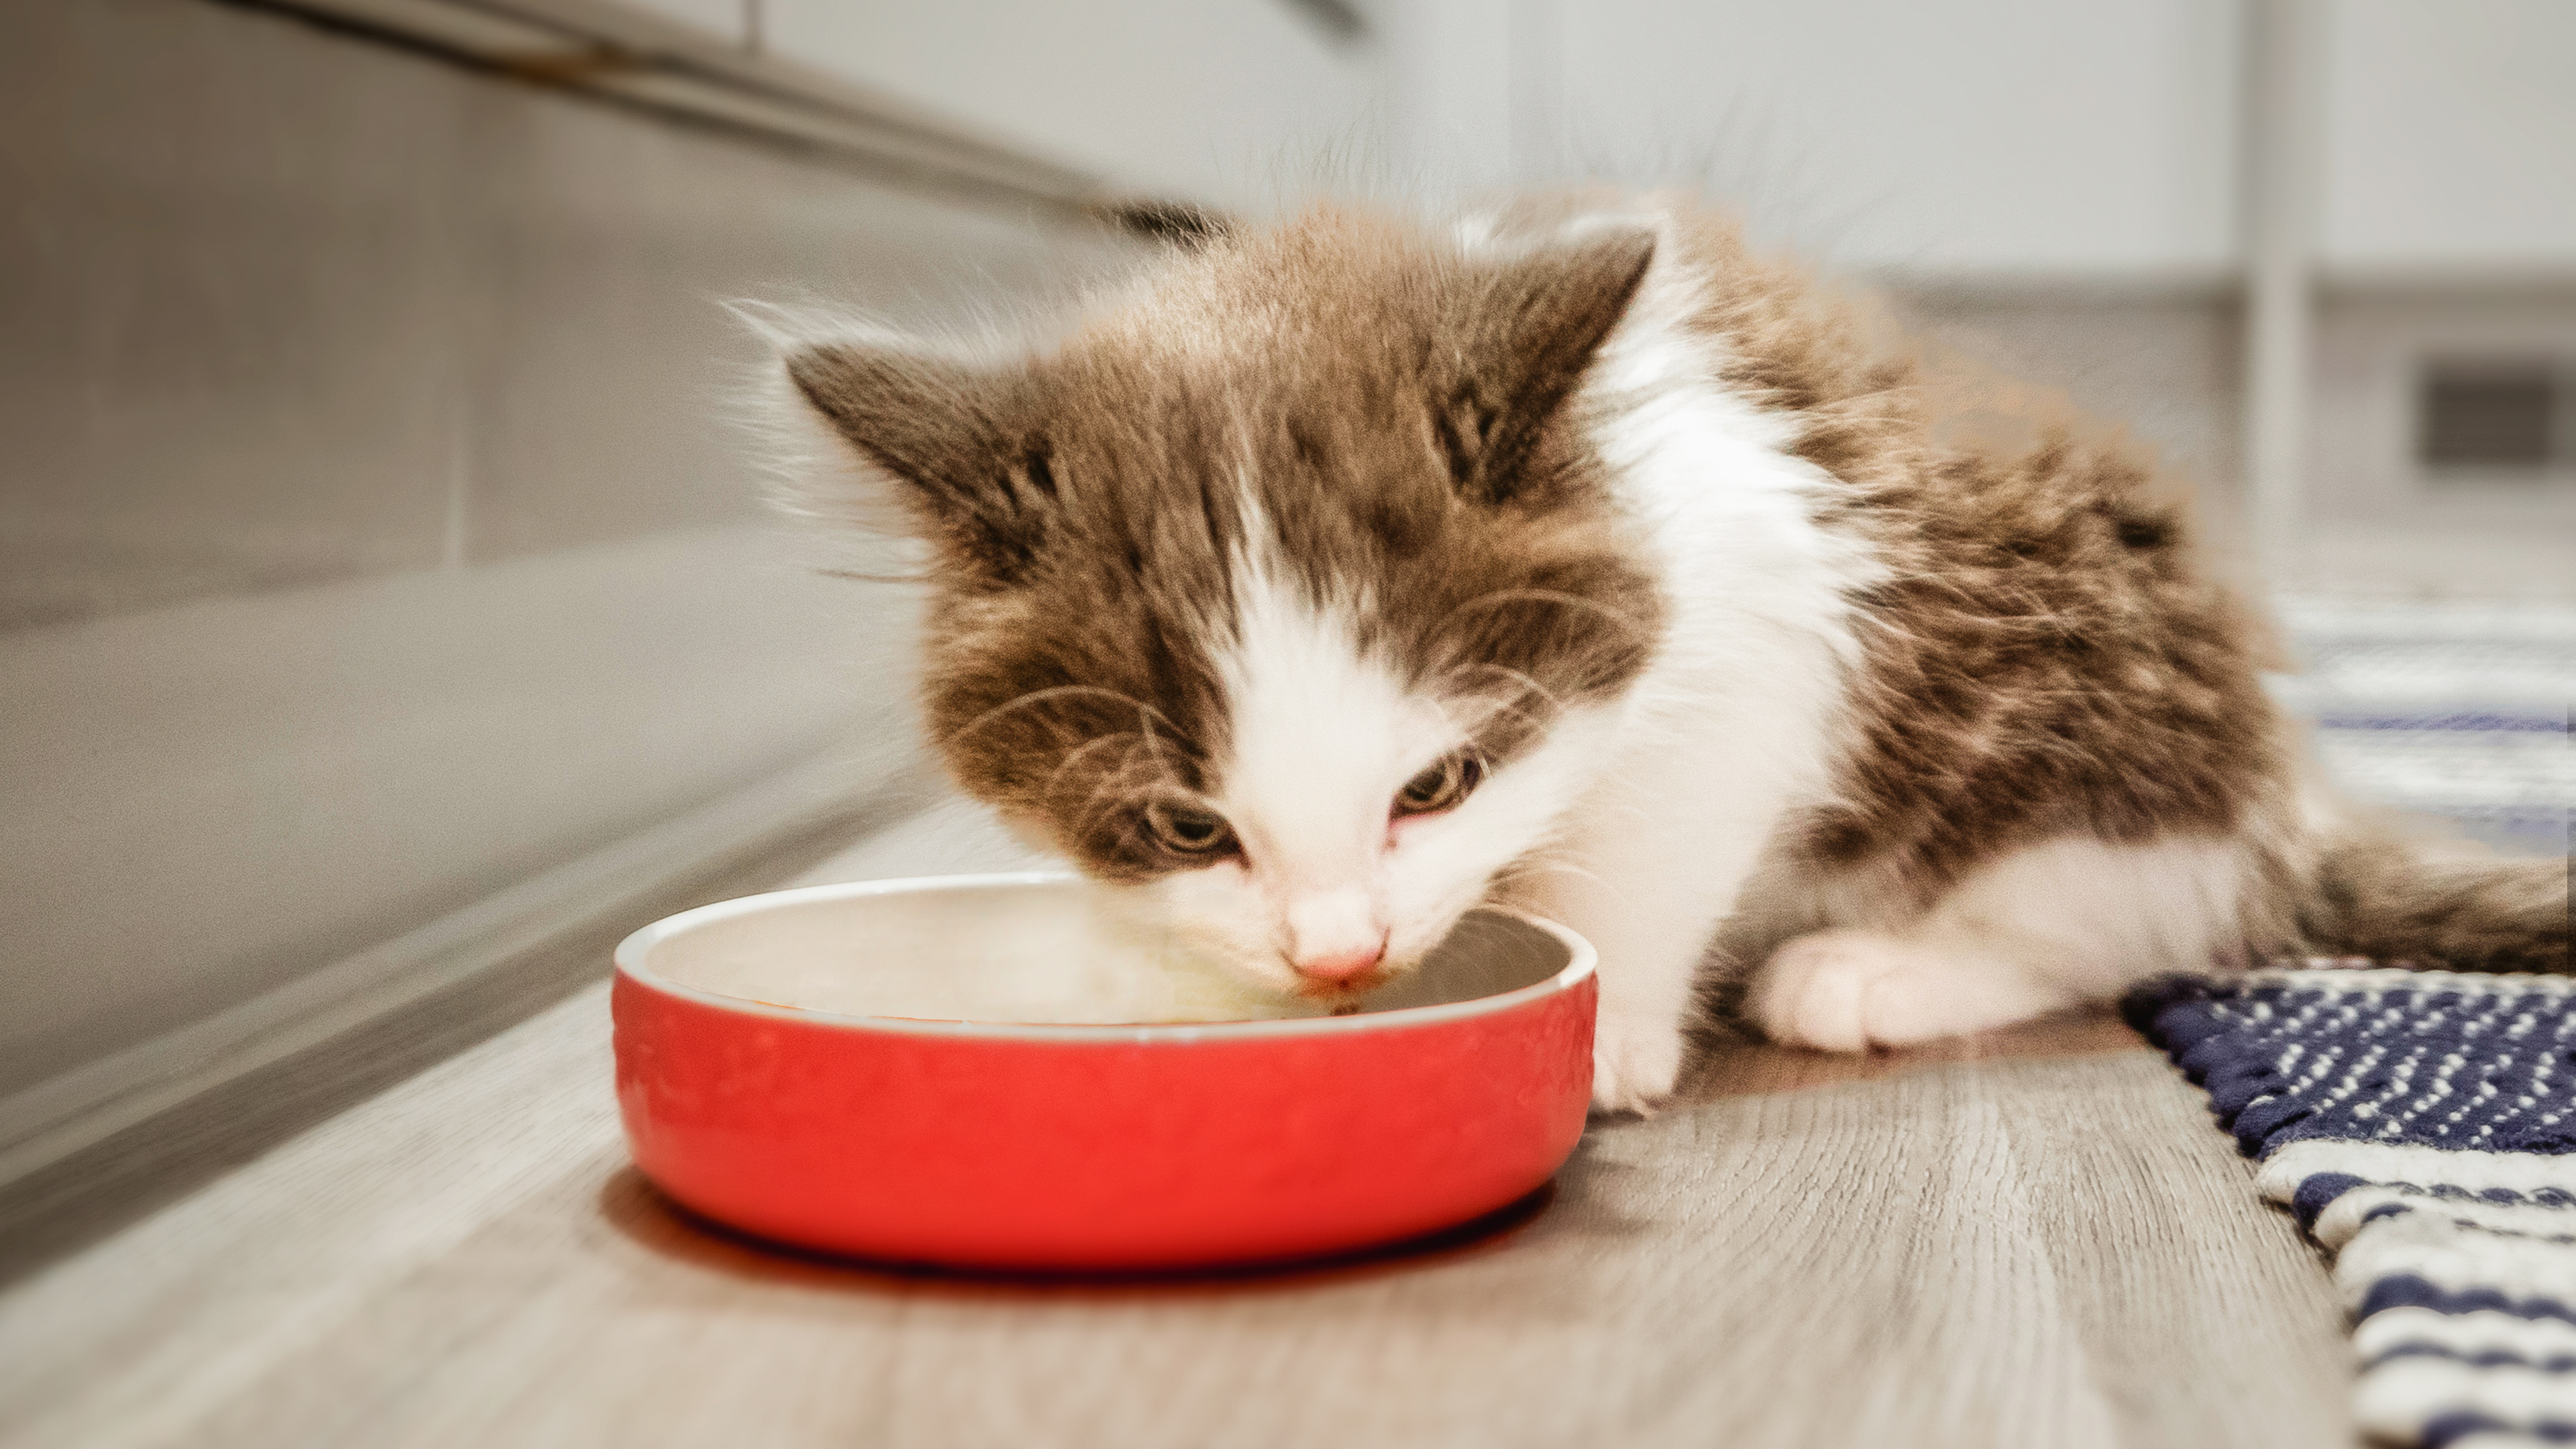 Brown and white kitten sitting in a kitchen eating from a red feeding bowl